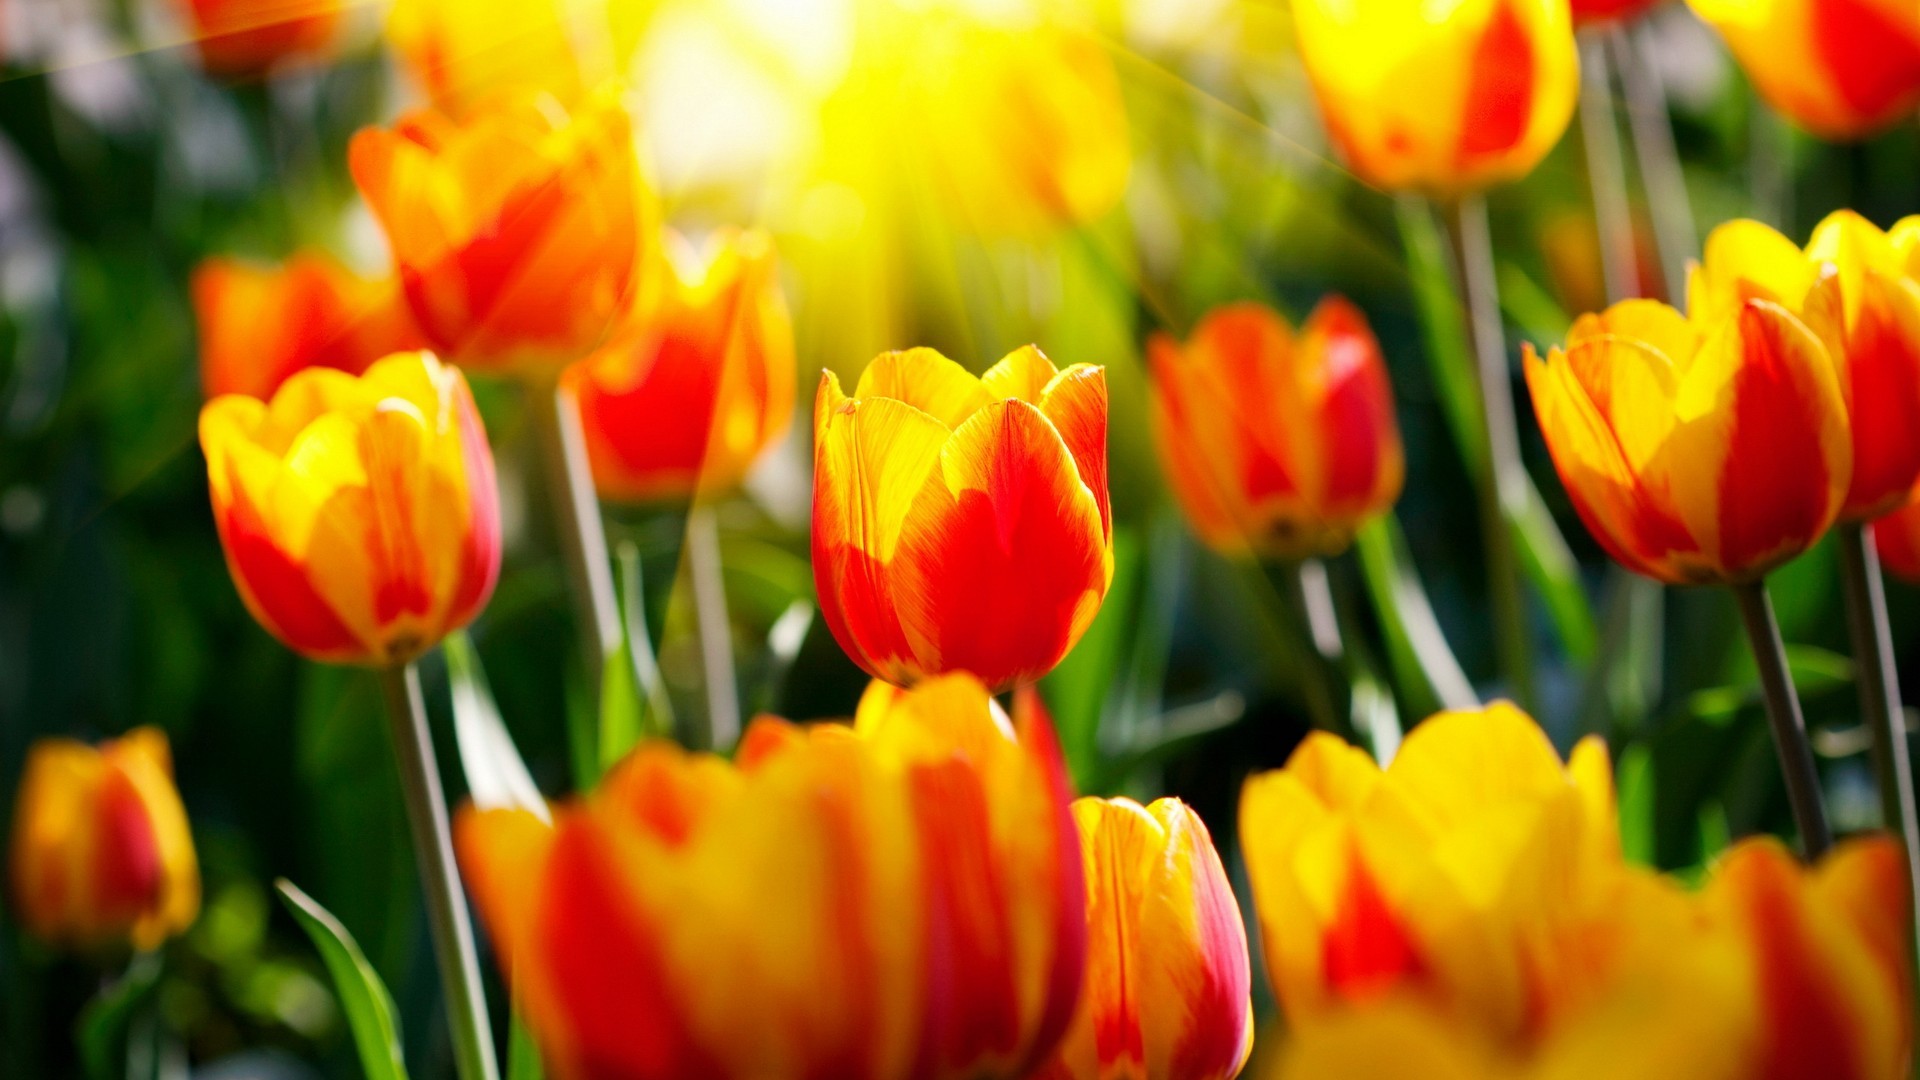 General 1920x1080 plants tulips flowers outdoors yellow flowers sunlight